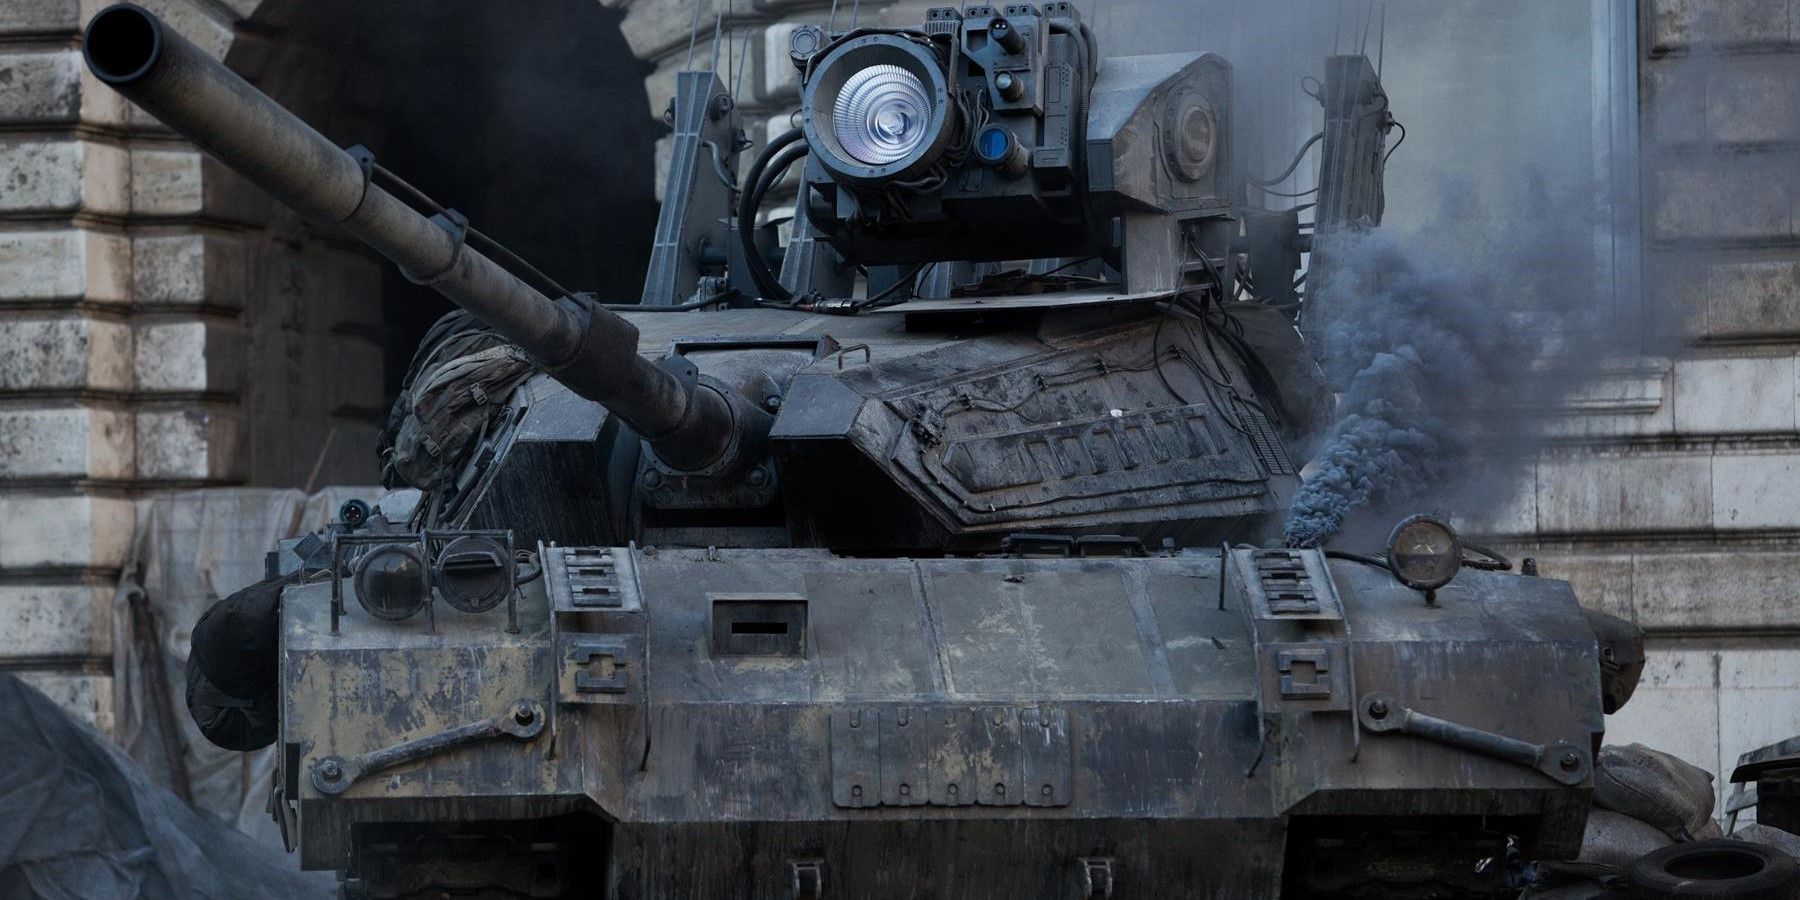 A tank in Netflix's action movie Spectral